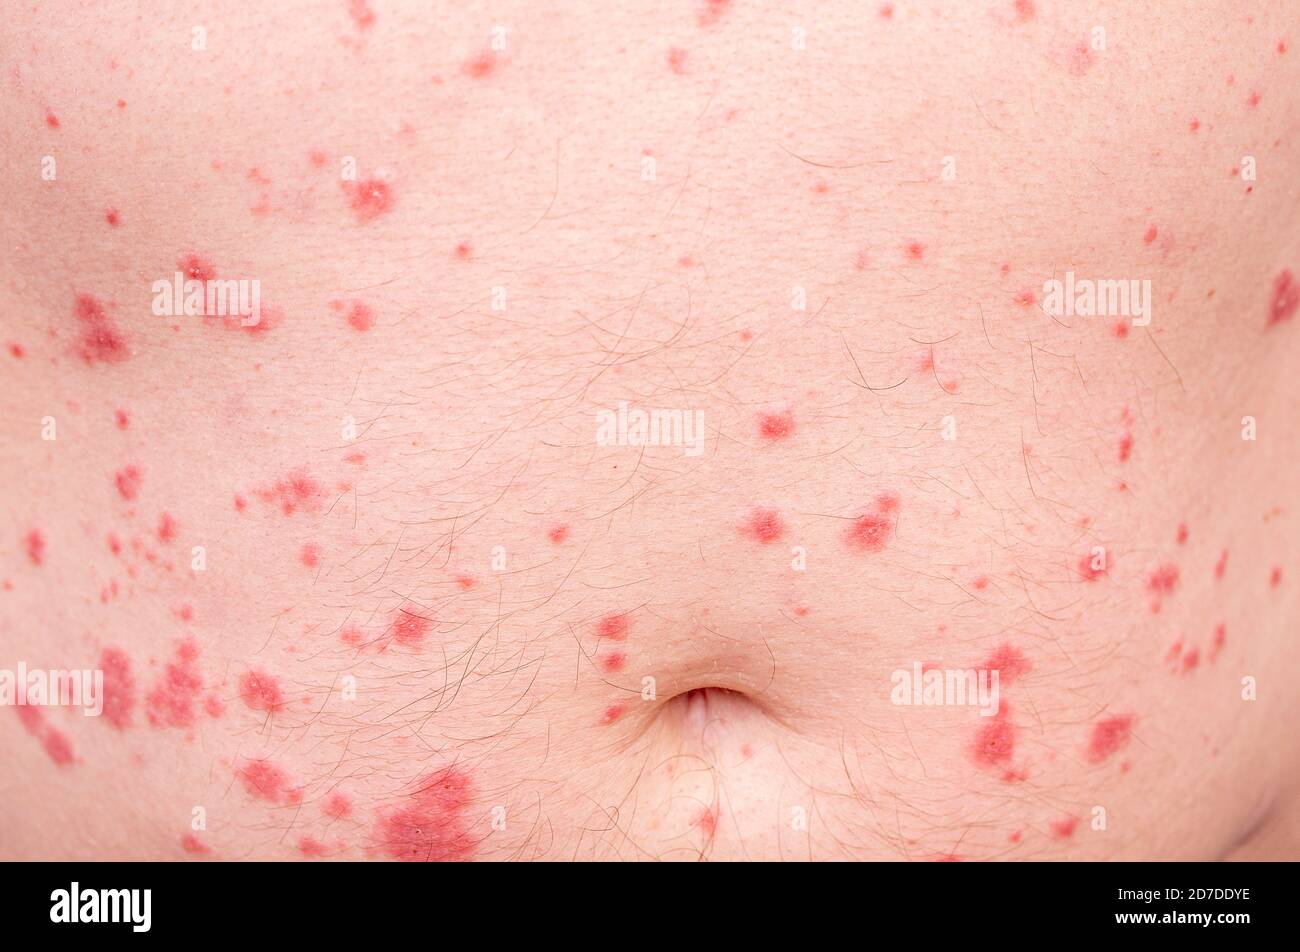 Close-up of skin disorder as hives or allergy. Human body with rash Stock Photo